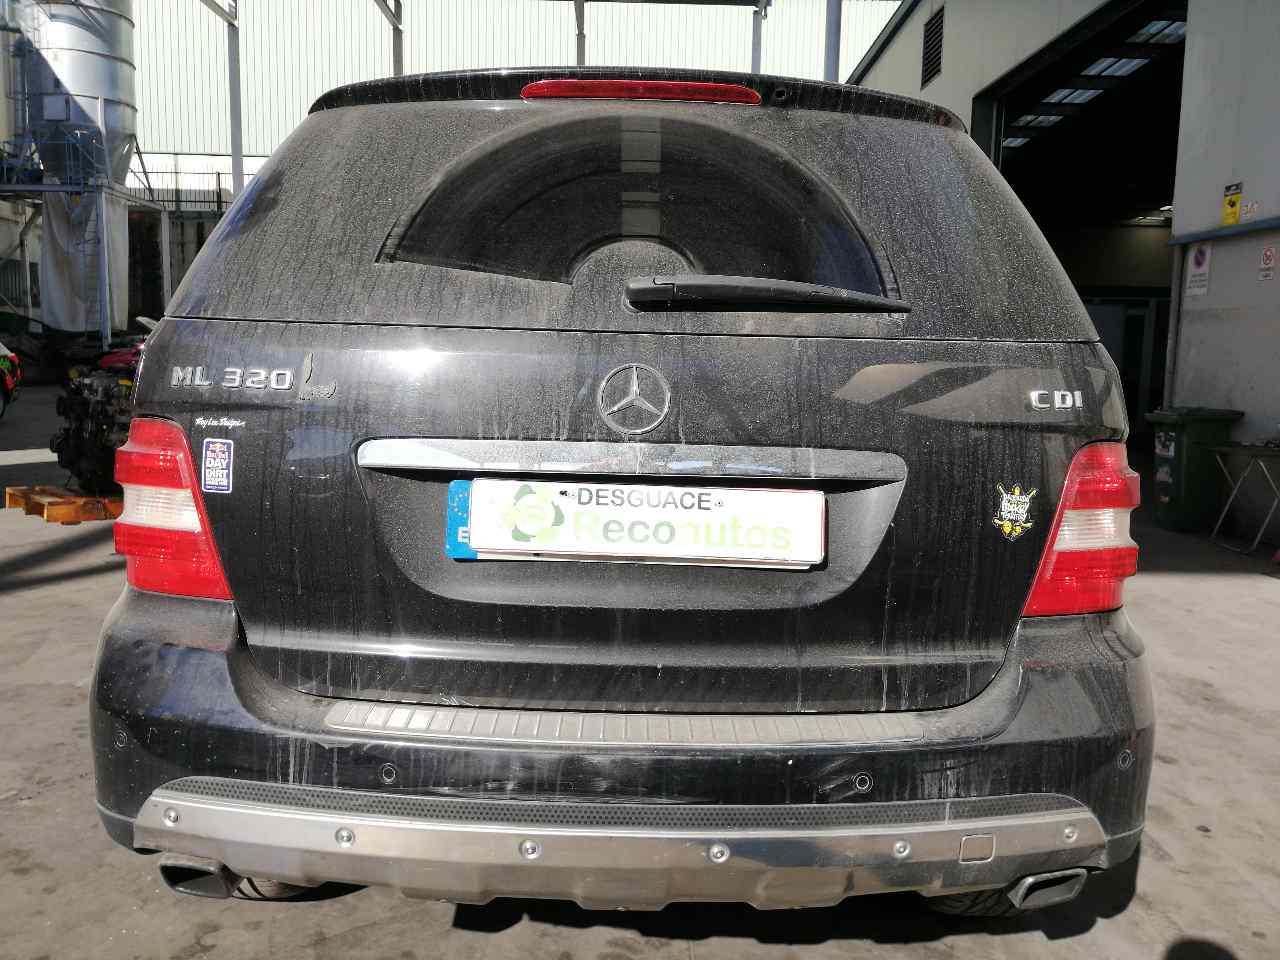 MERCEDES-BENZ M-Class W164 (2005-2011) Other Control Units A0045423818, 10170103573, ATE 19895102